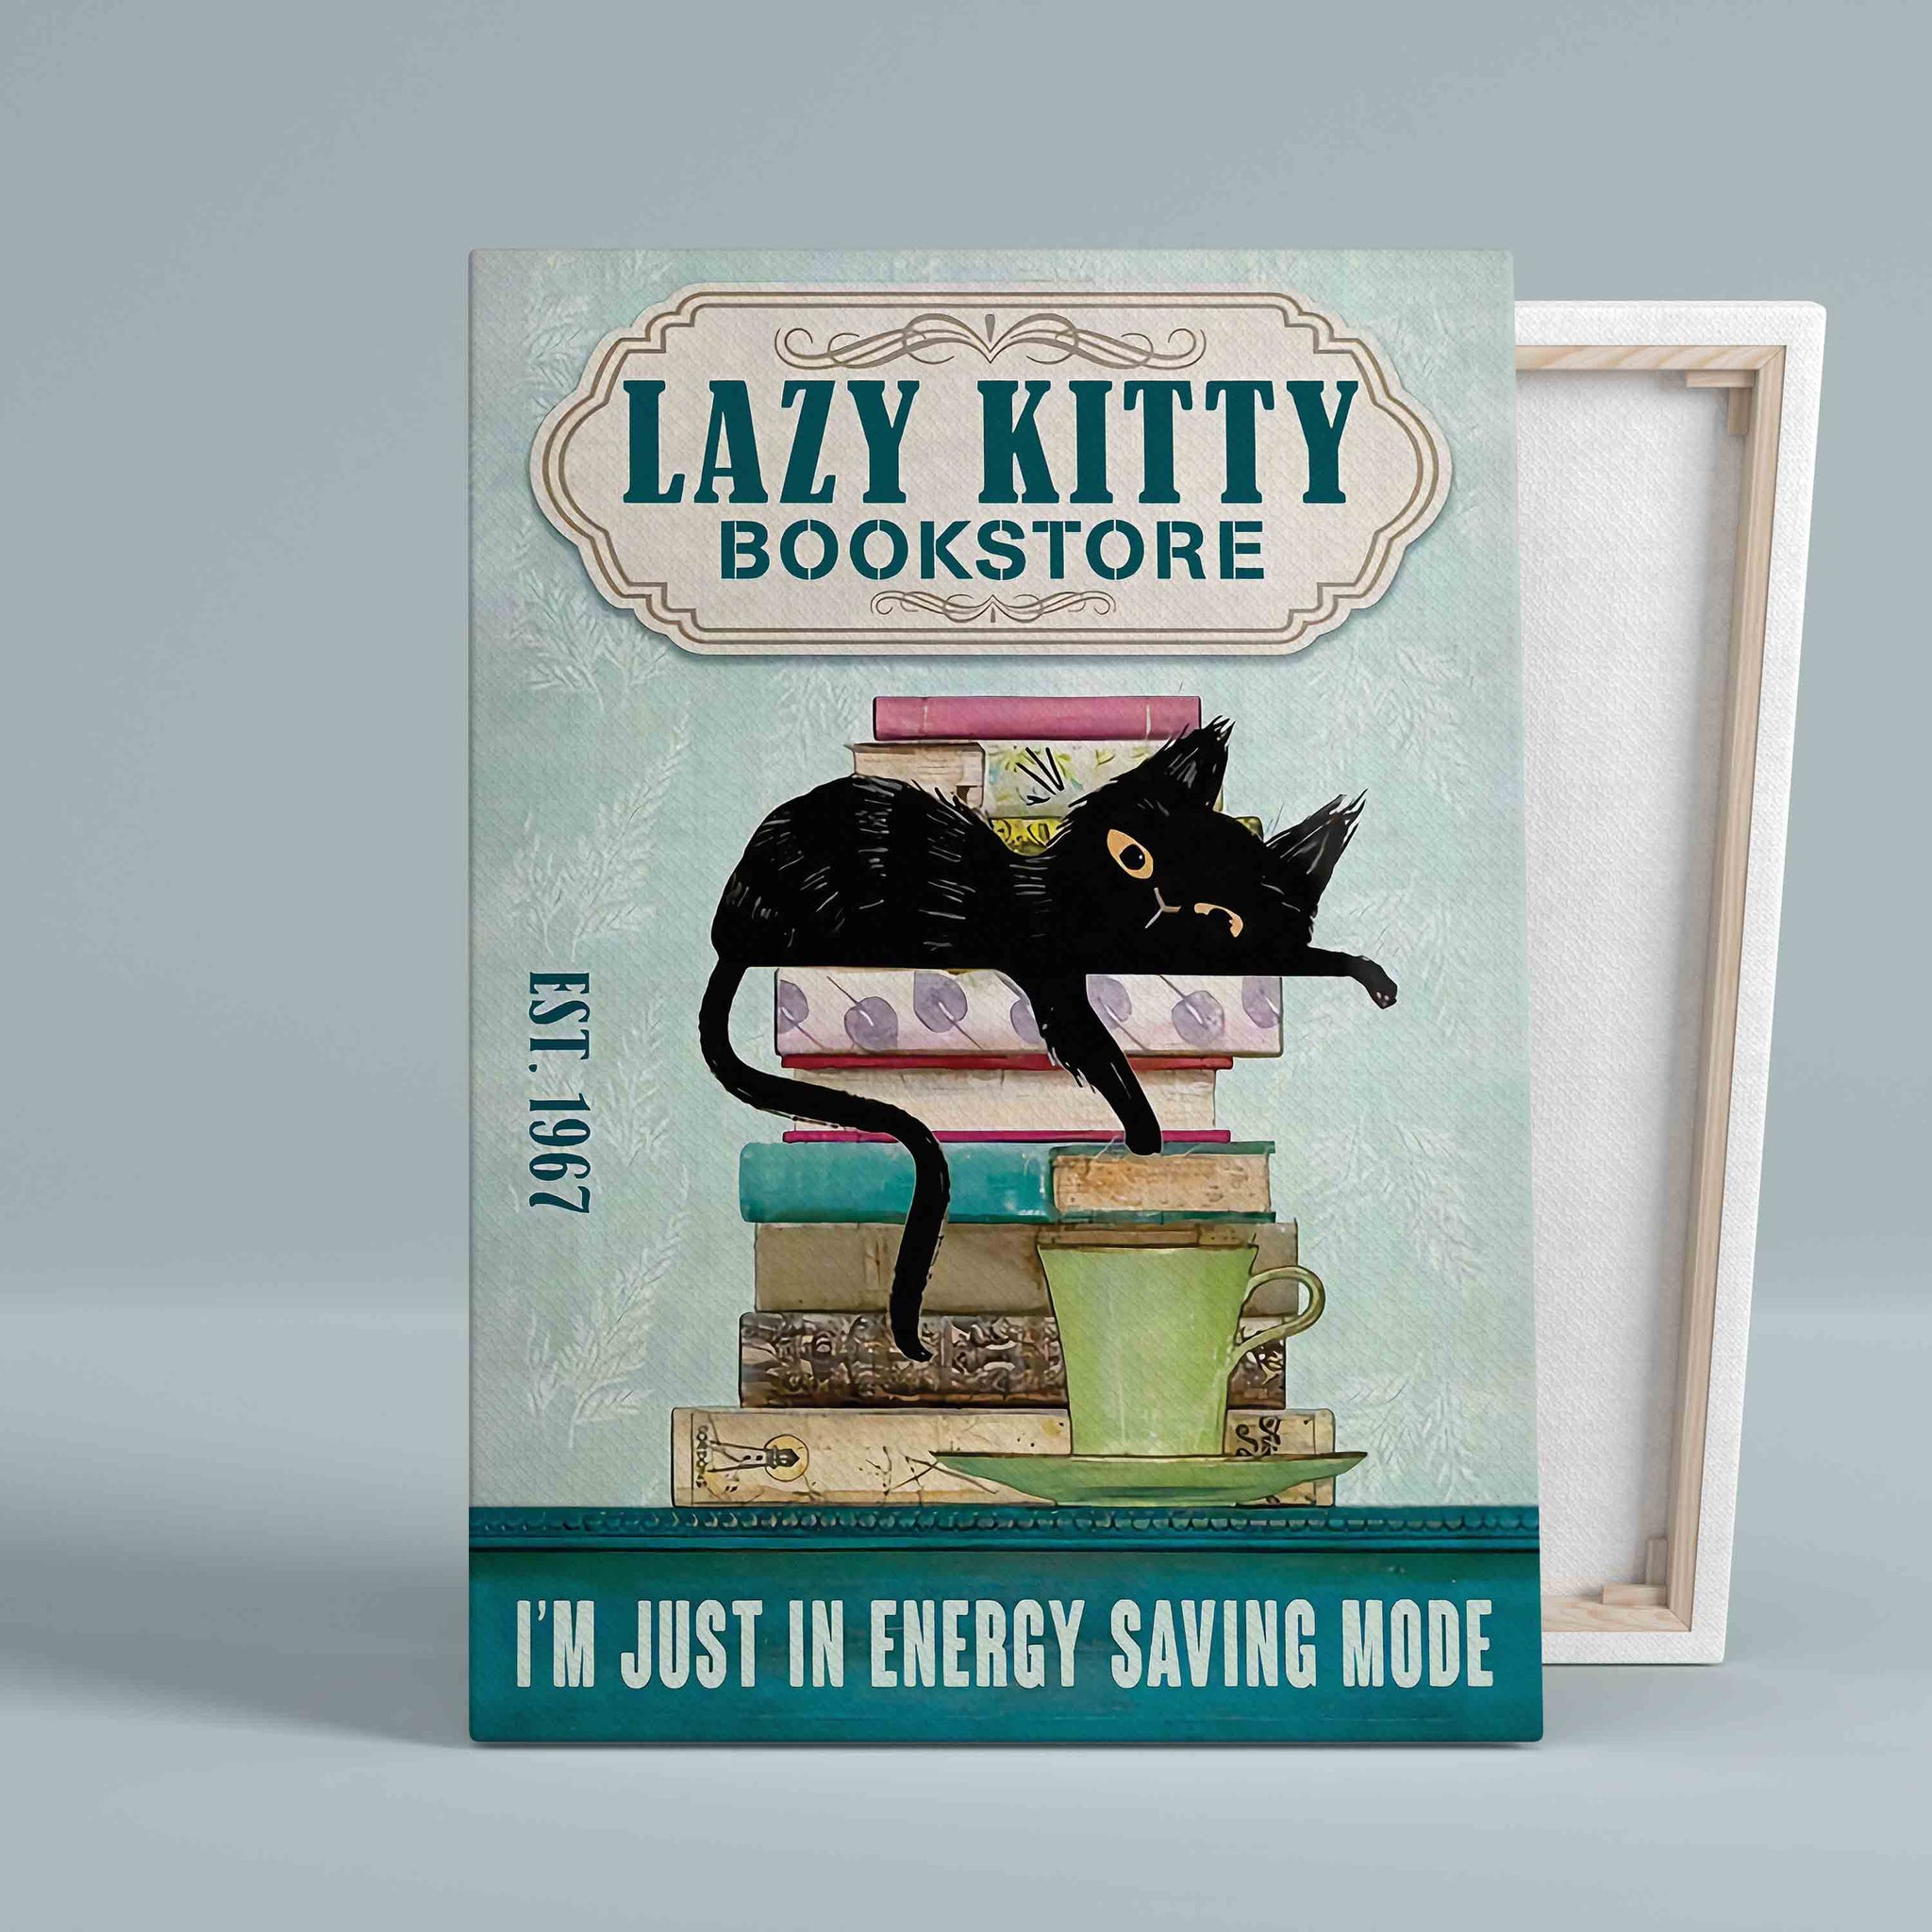 Lazy Kitty Bookstore Canvas, Lazy Kitty Canvas, Black Cat Canvas, Wall Art Canvas, Gift Canvas